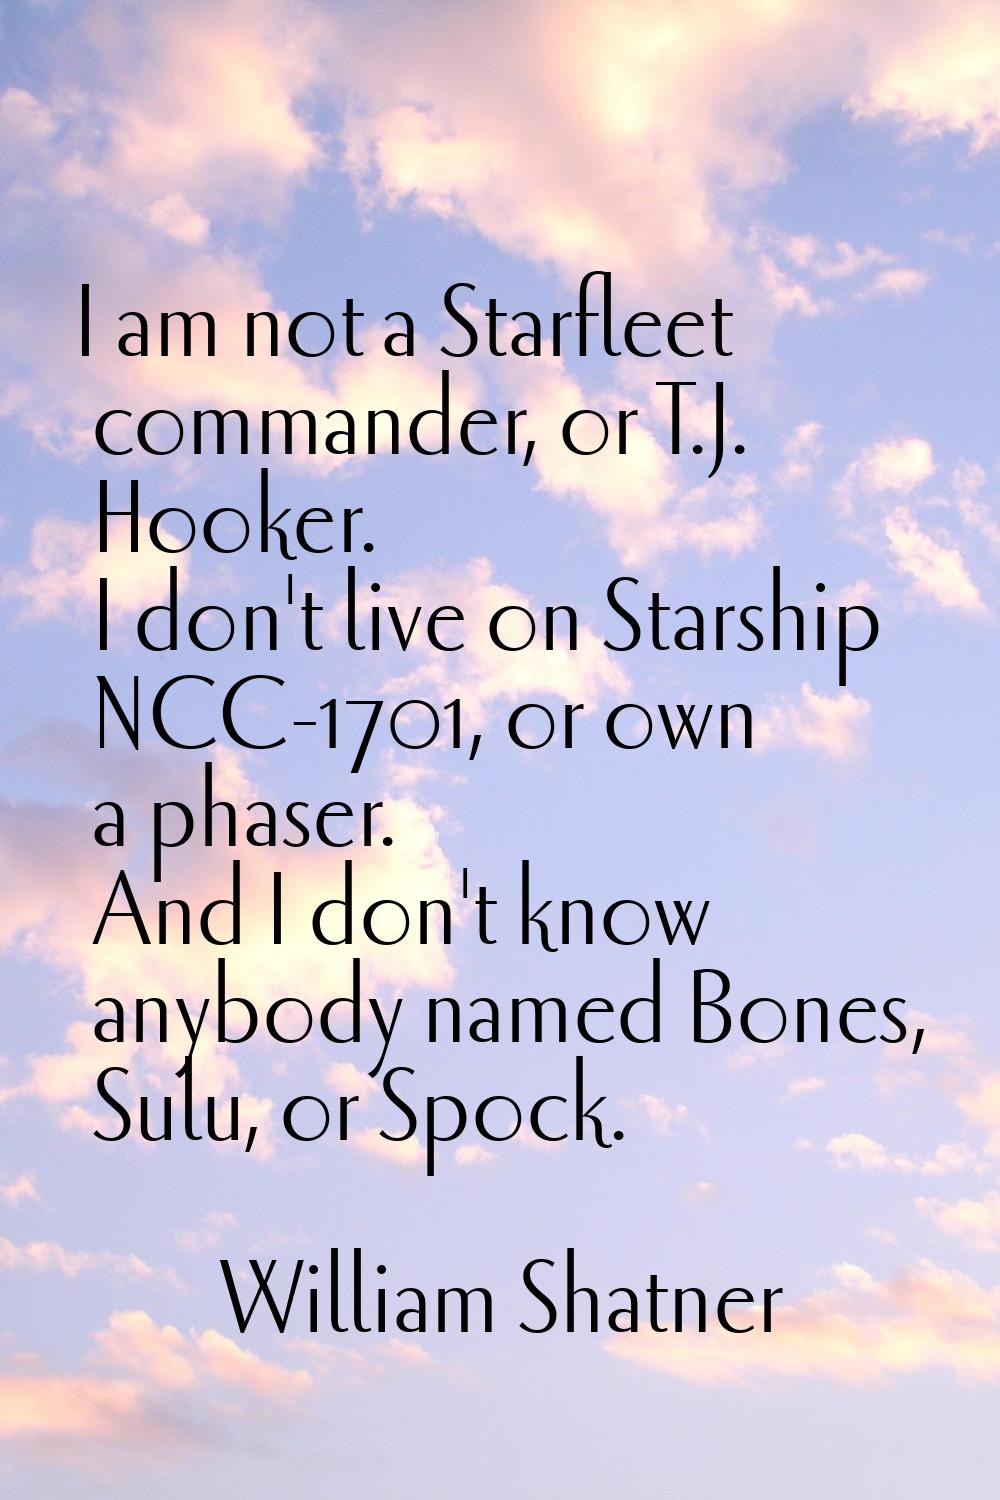 I am not a Starfleet commander, or T.J. Hooker. I don't live on Starship NCC-1701, or own a phaser.